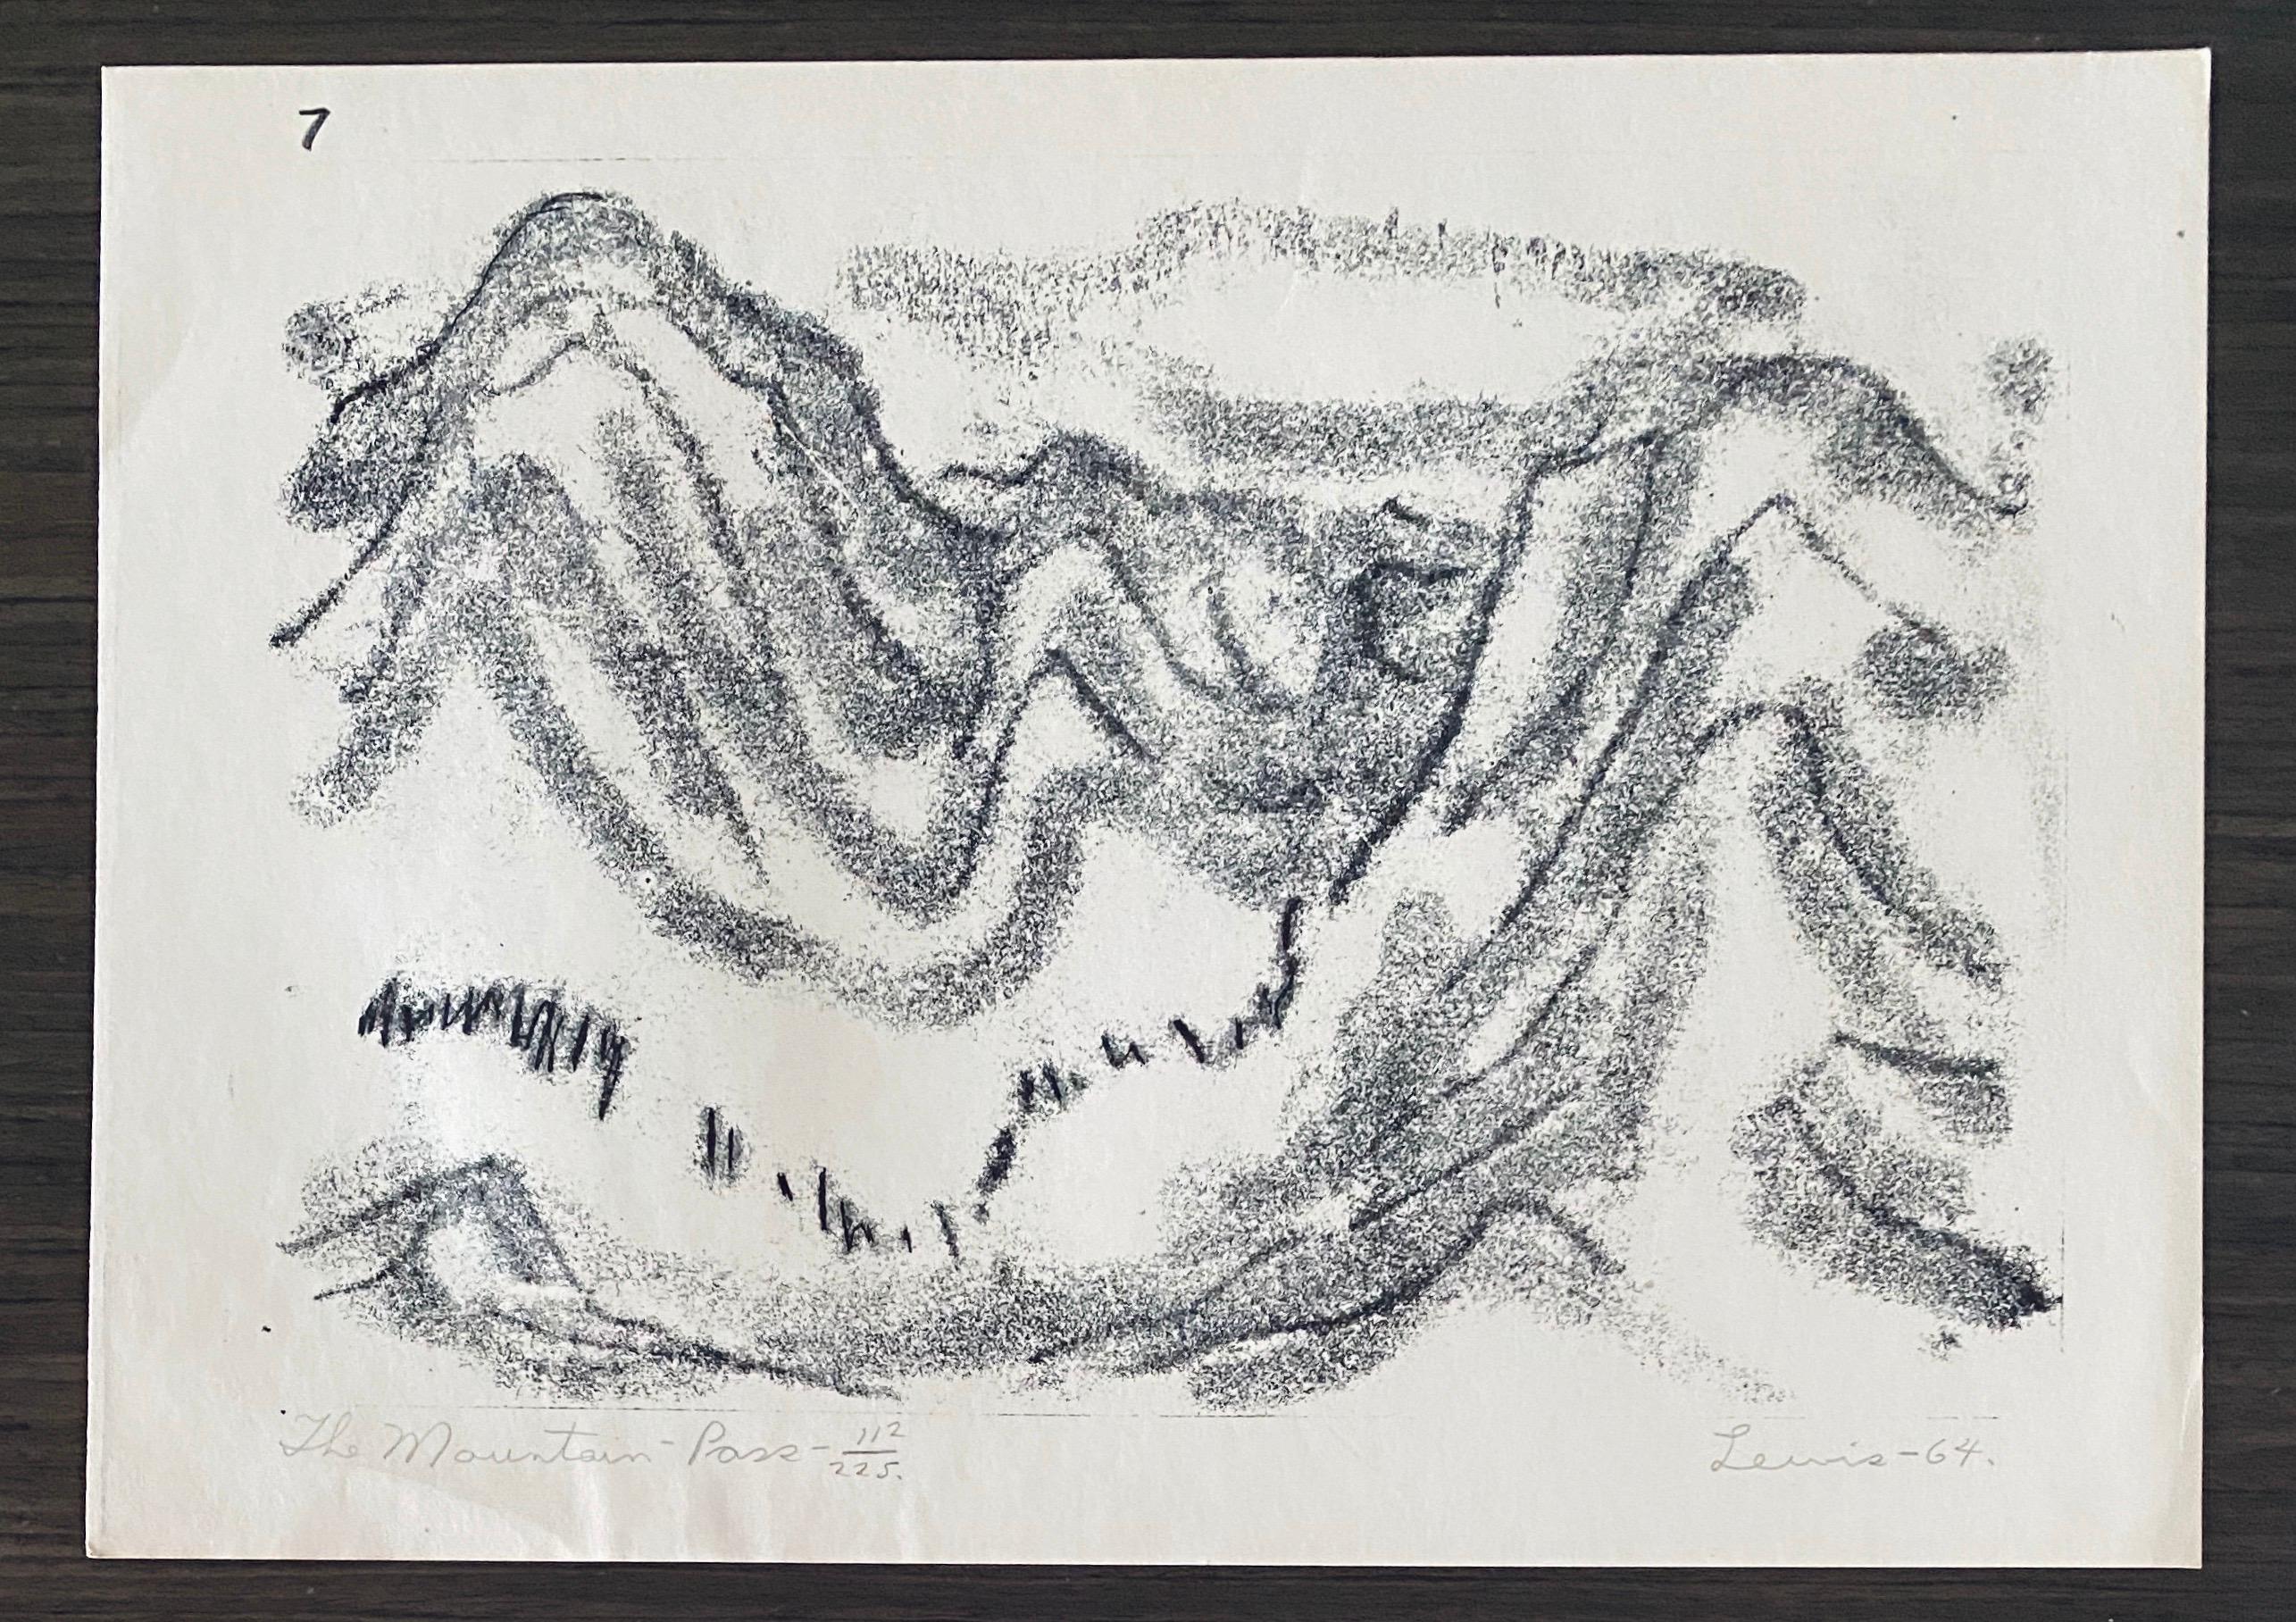 Stanley Lewis Abstract Print - "The Mountain Pass" from Wanderers Illustrations 112/225